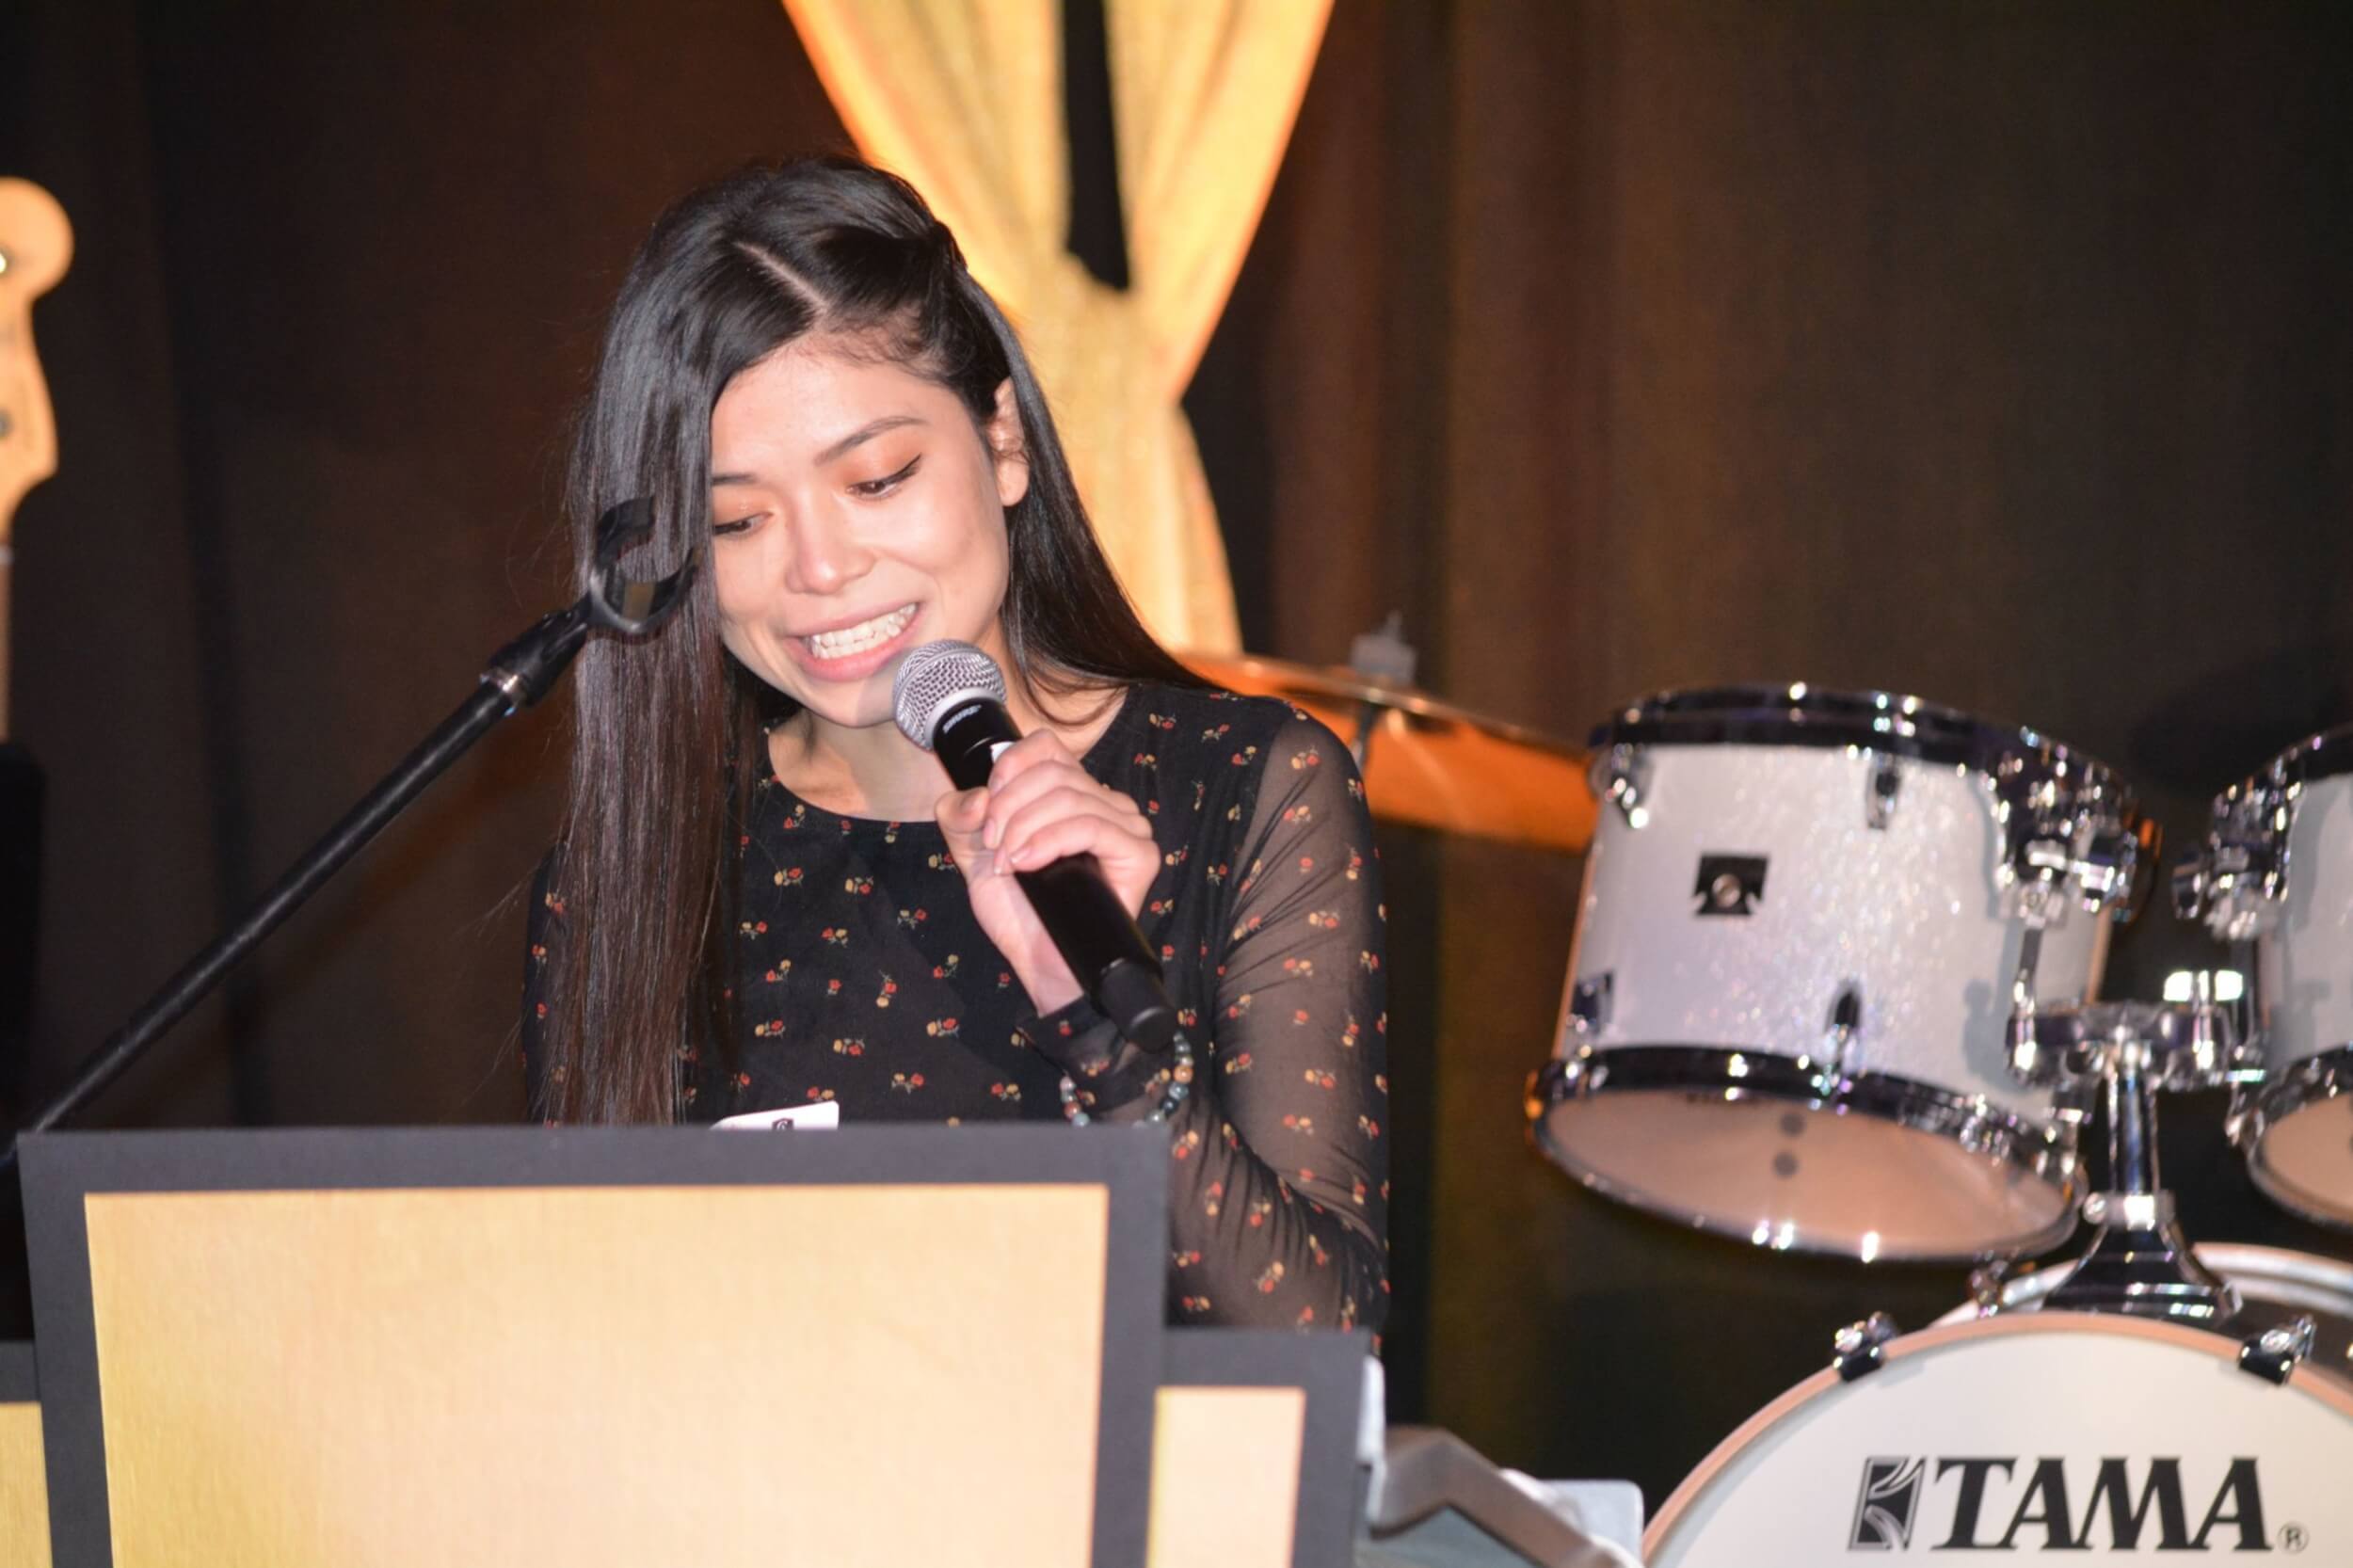 Horizons alumna Cristal Chacon spoke at the 2021 Wine and Dine event.